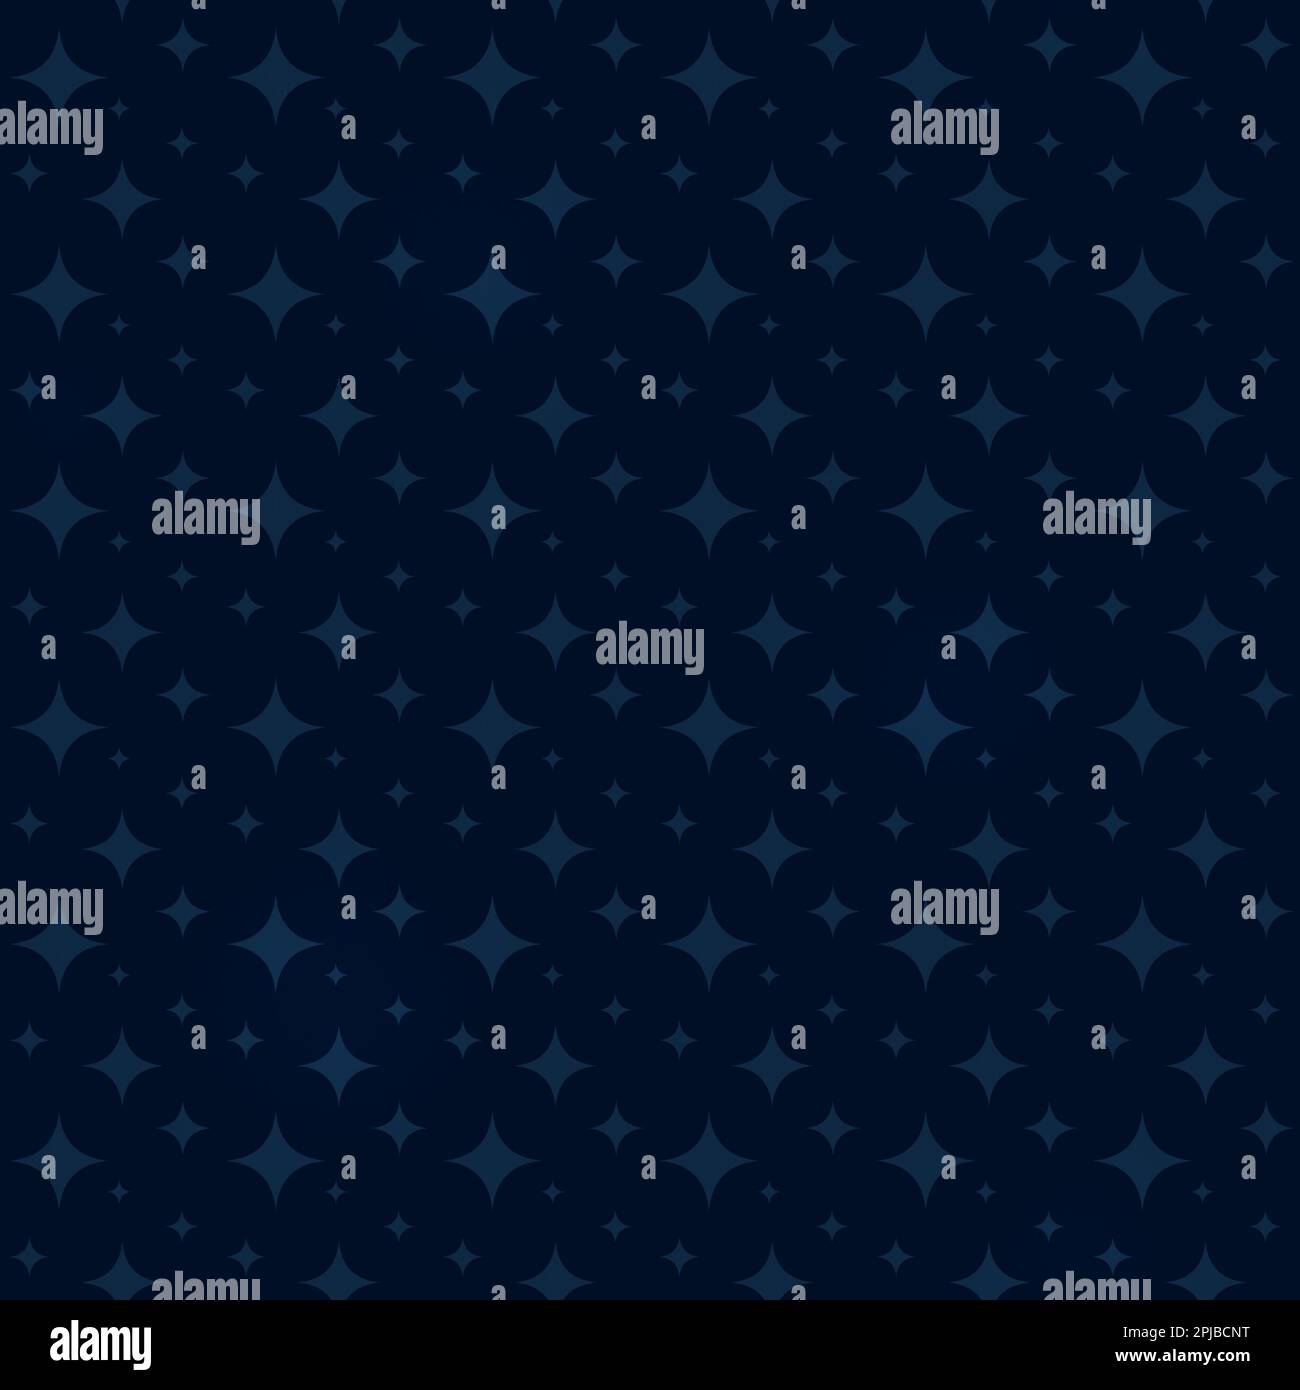 Seamless pattern of blue star shapes on dark blue background. Abstract full frame graphic design of stars. Stock Photo